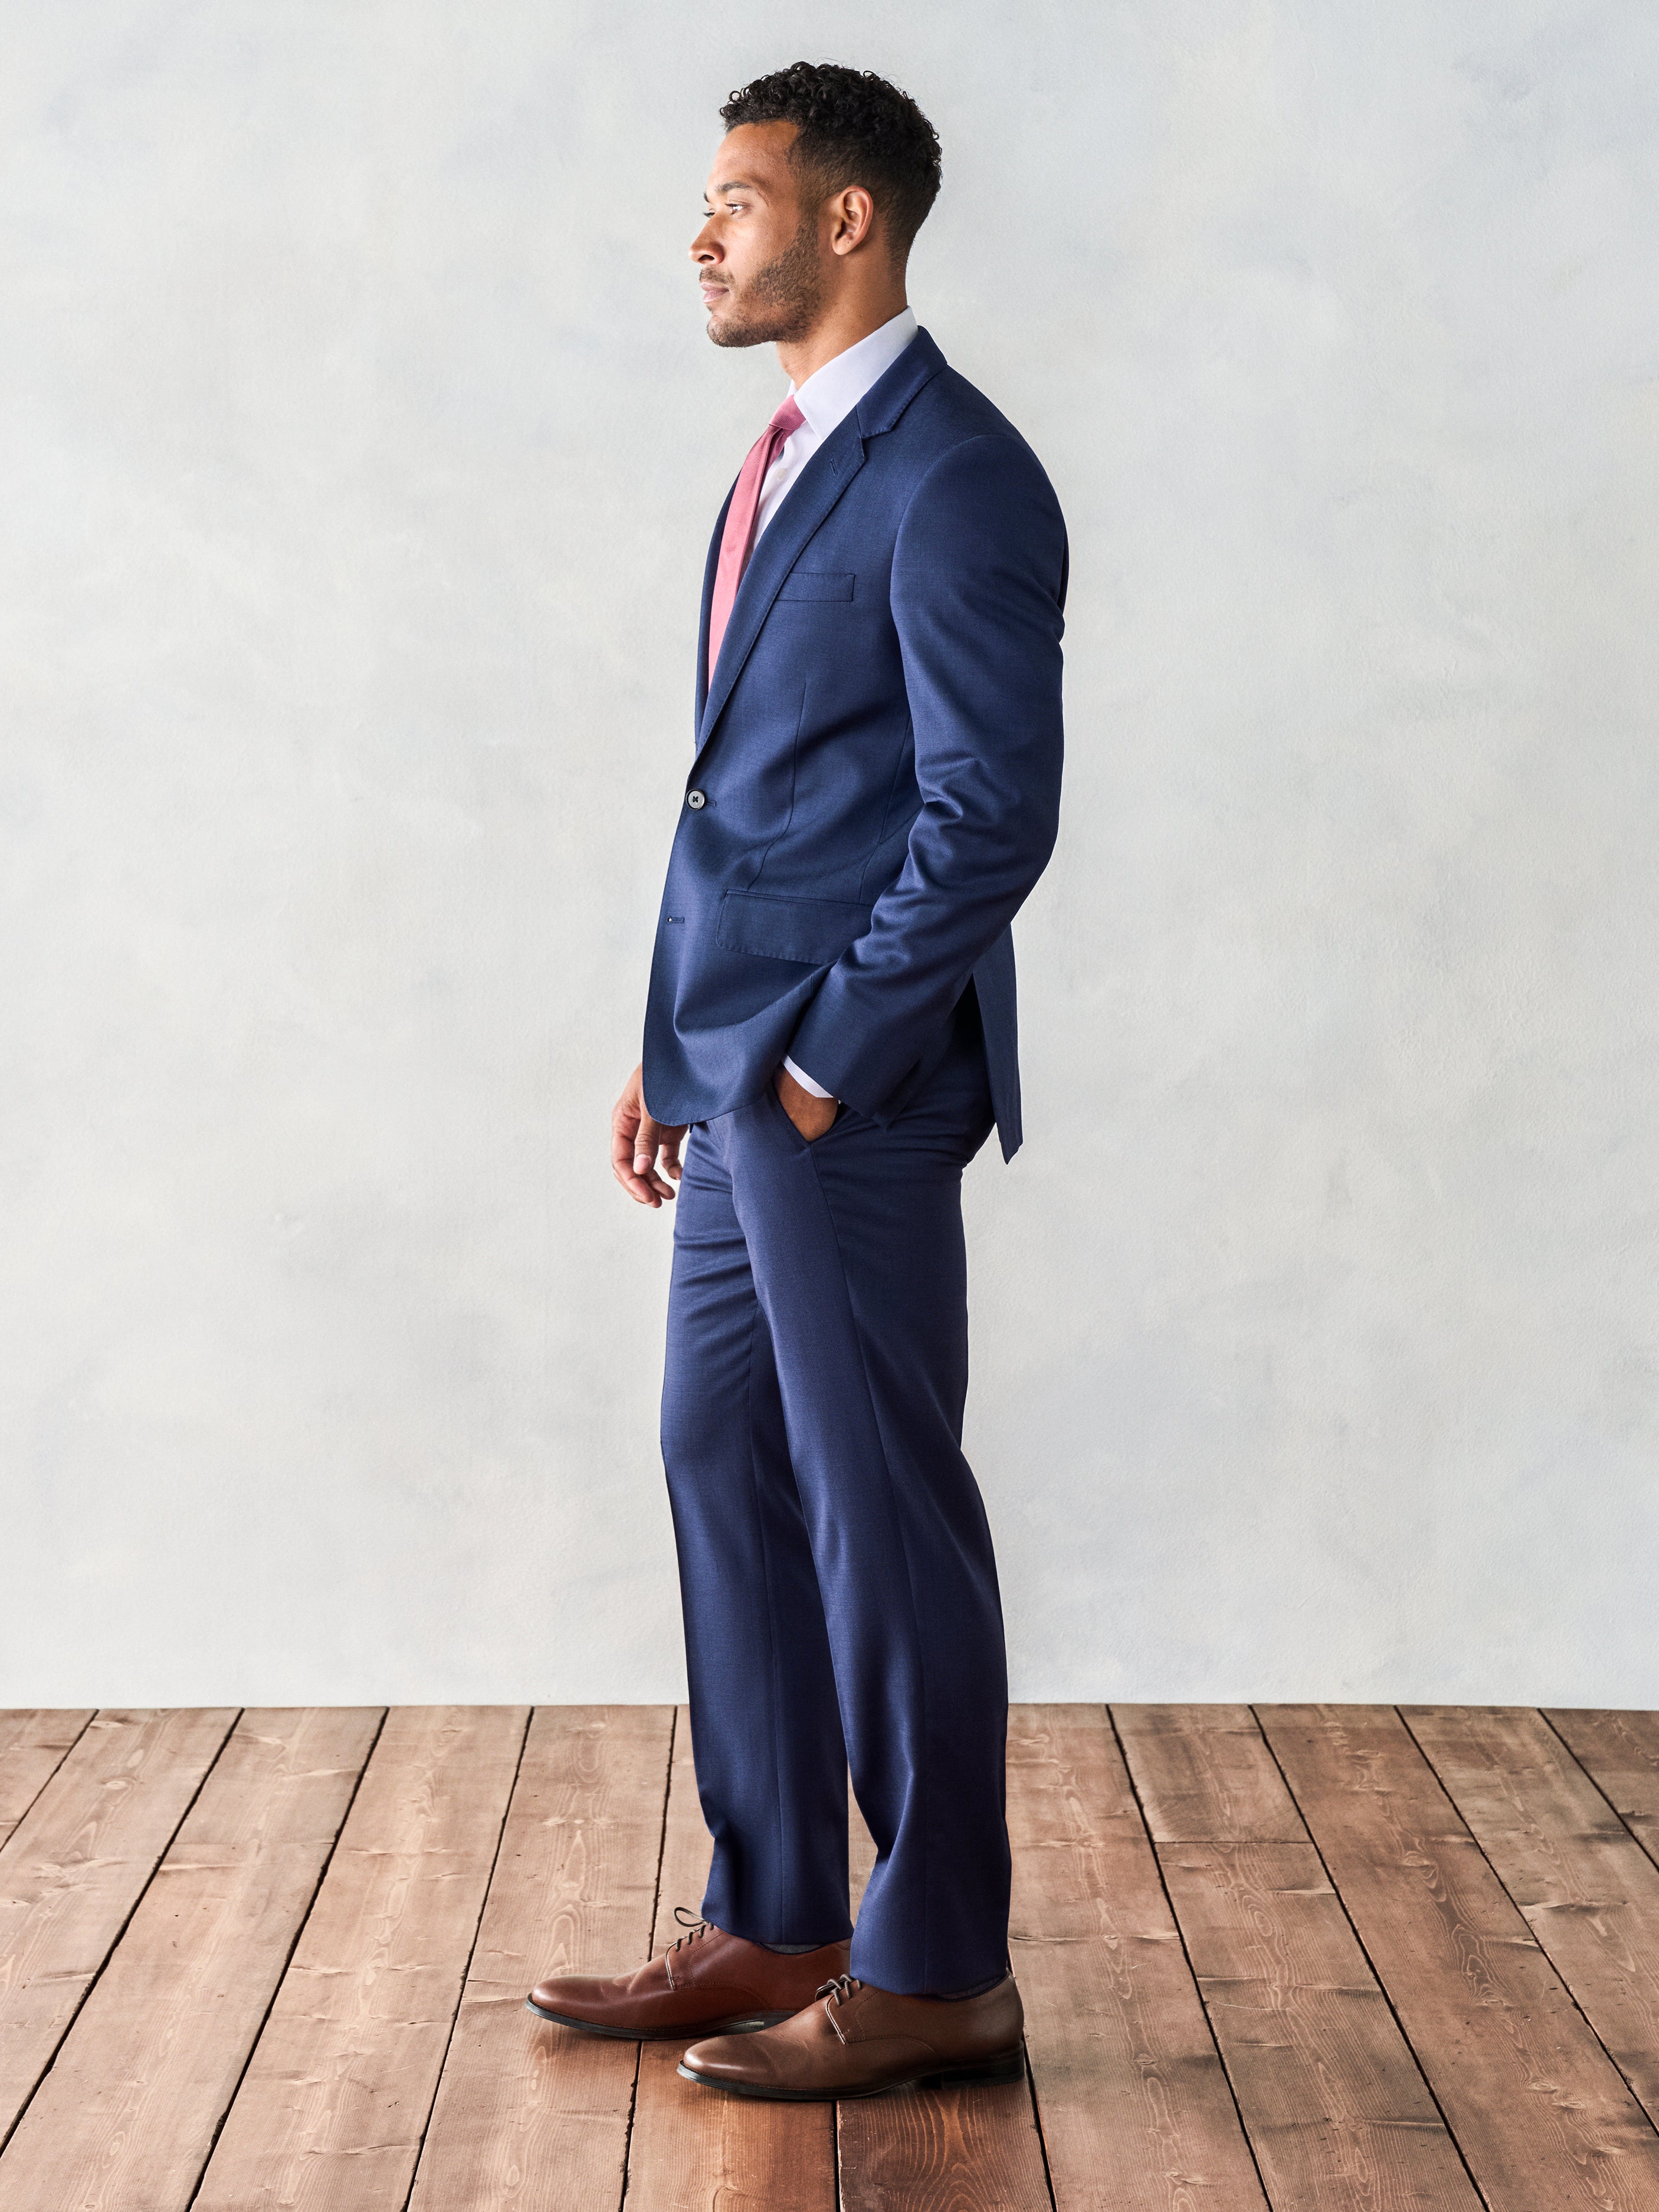 The Best Summer Wedding Suits for Men in 2023: Easy, Breezy, Ultra Steezy  Options for Every Budget | GQ